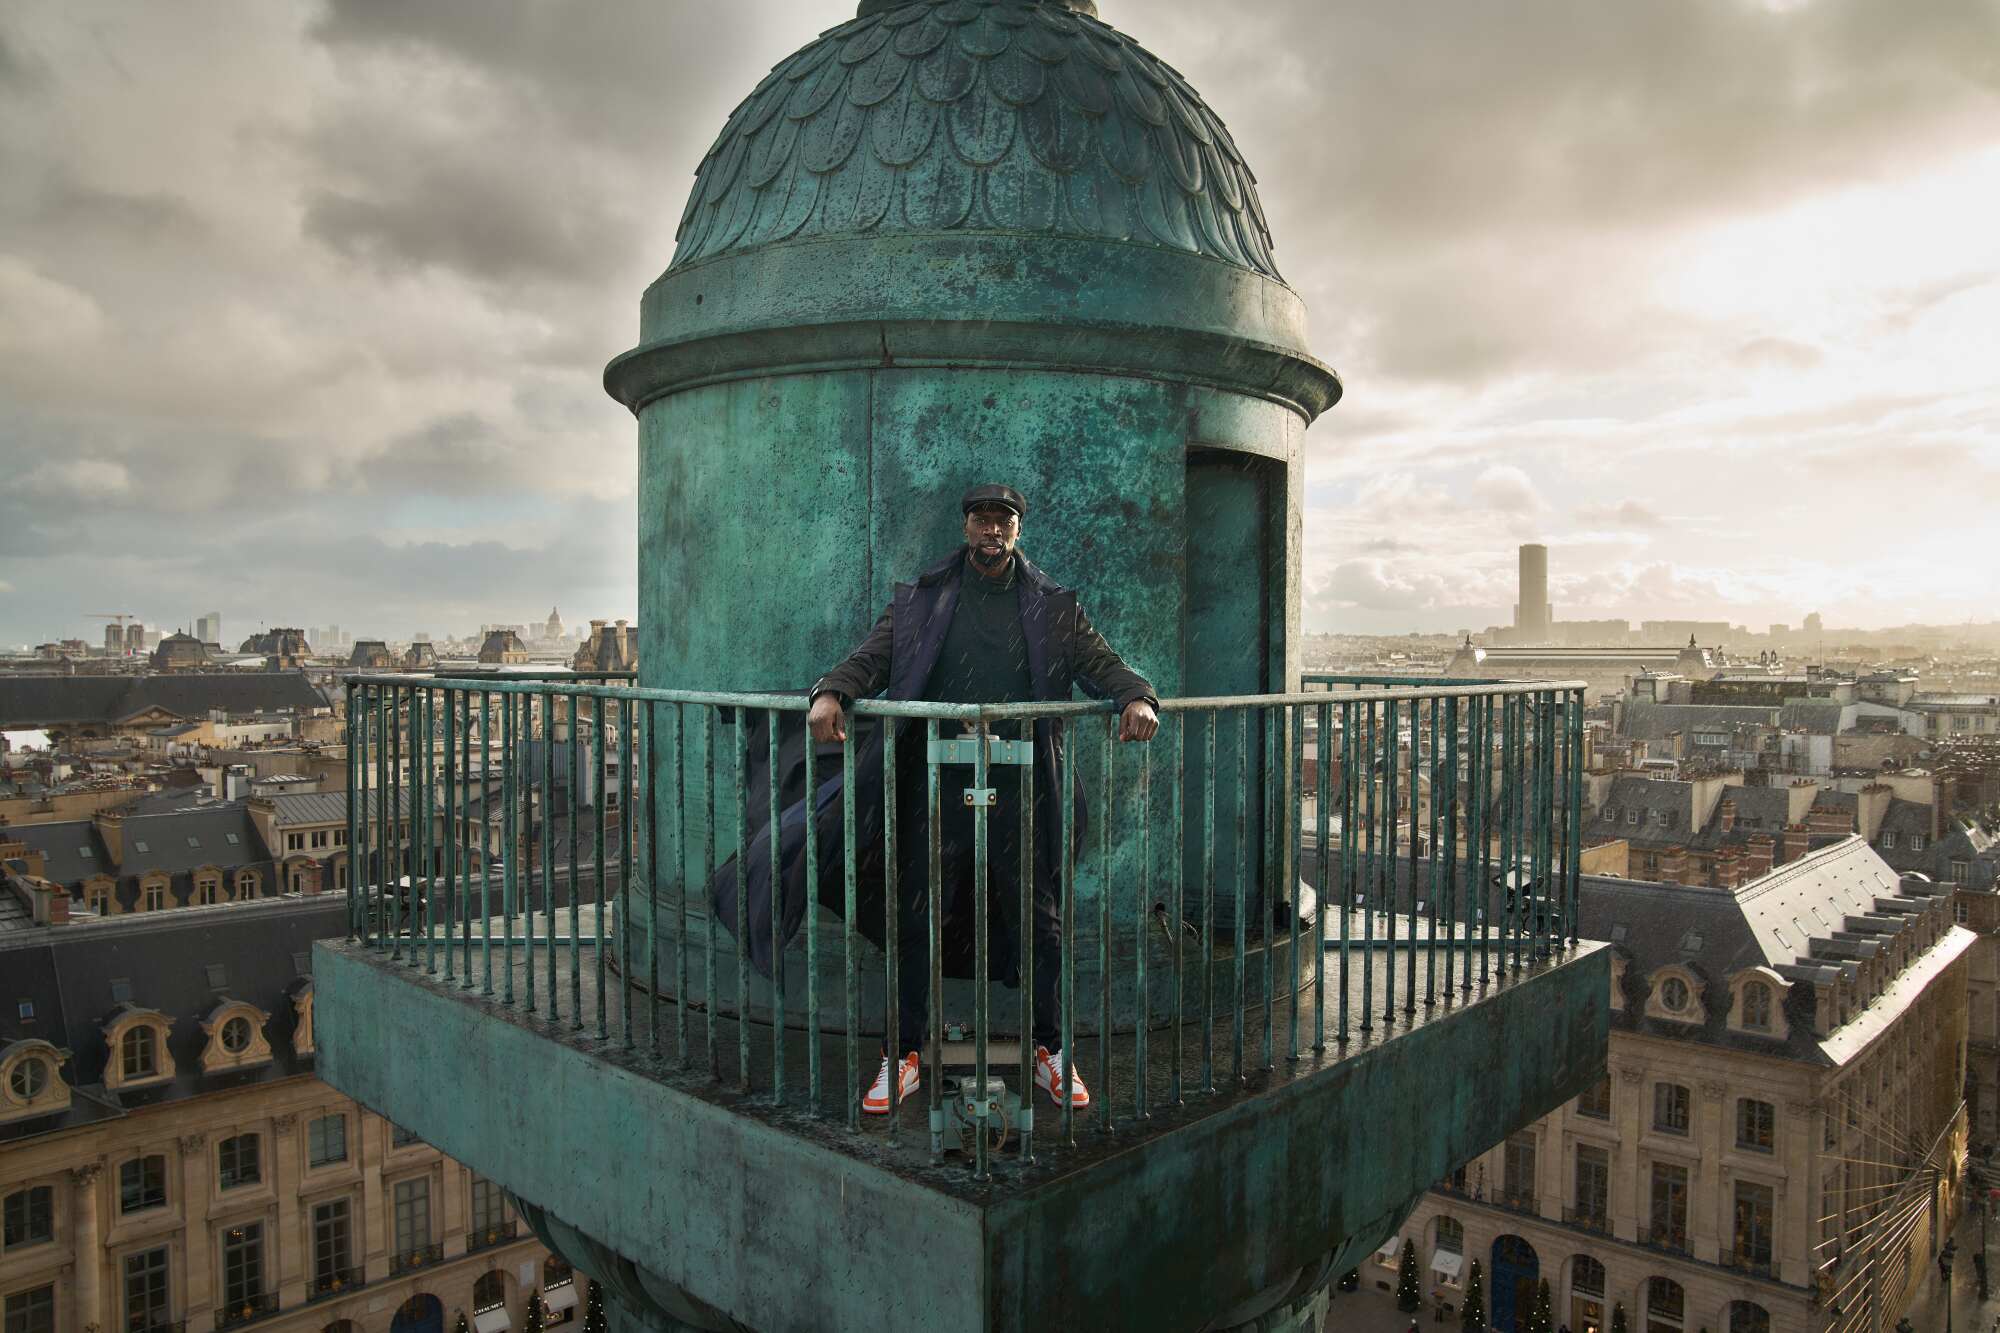 Assane Diop stands with his hands on the fencing of the ledge of a building.